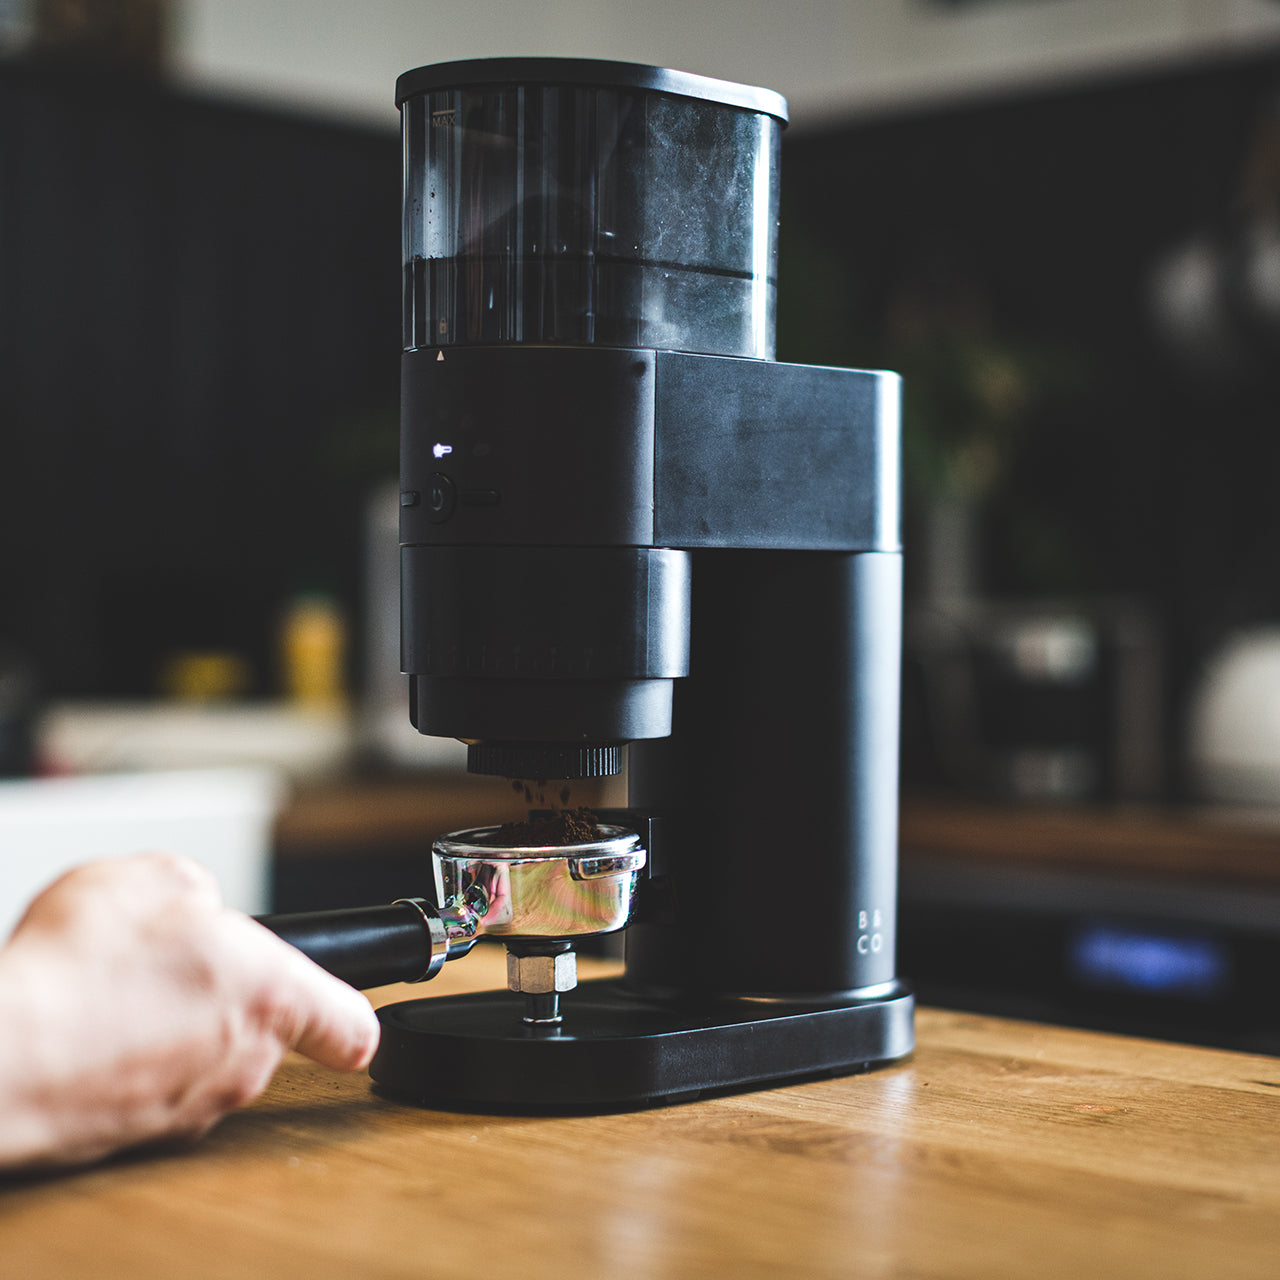 Electric coffee grinder in use